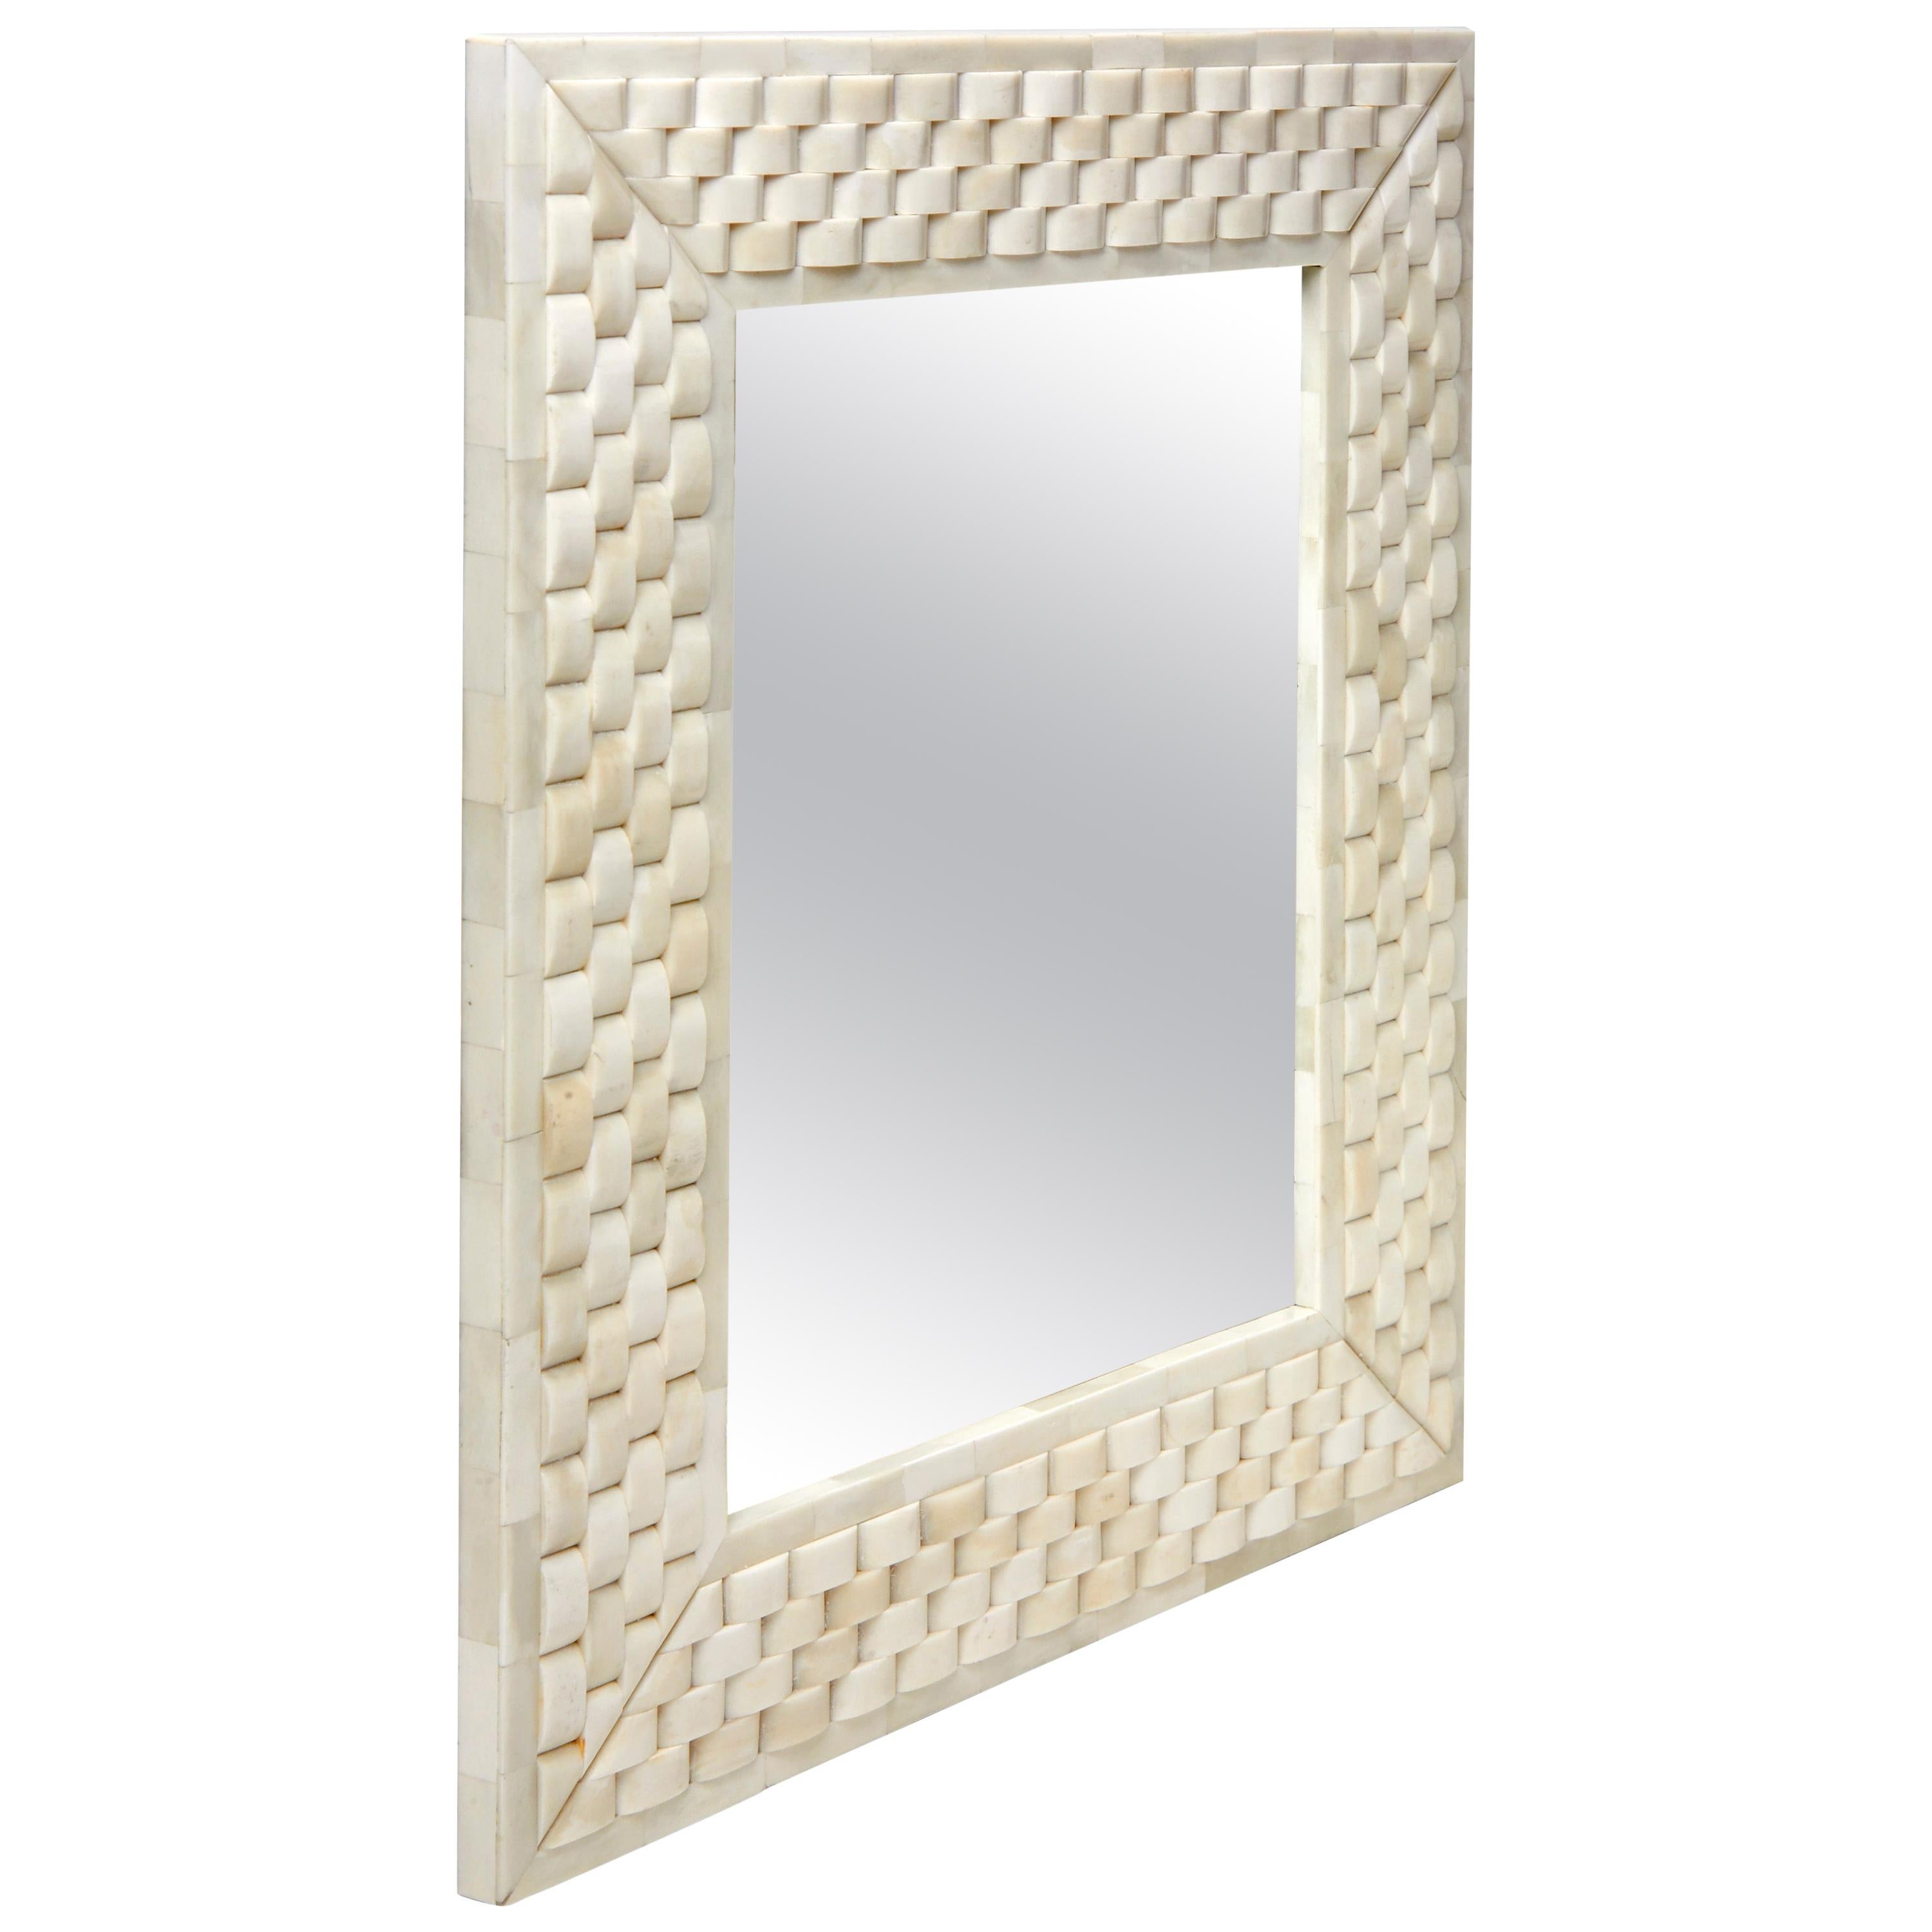 Mirror Frame Made with Carved Bone to Form Basket Weave- in stock For Sale